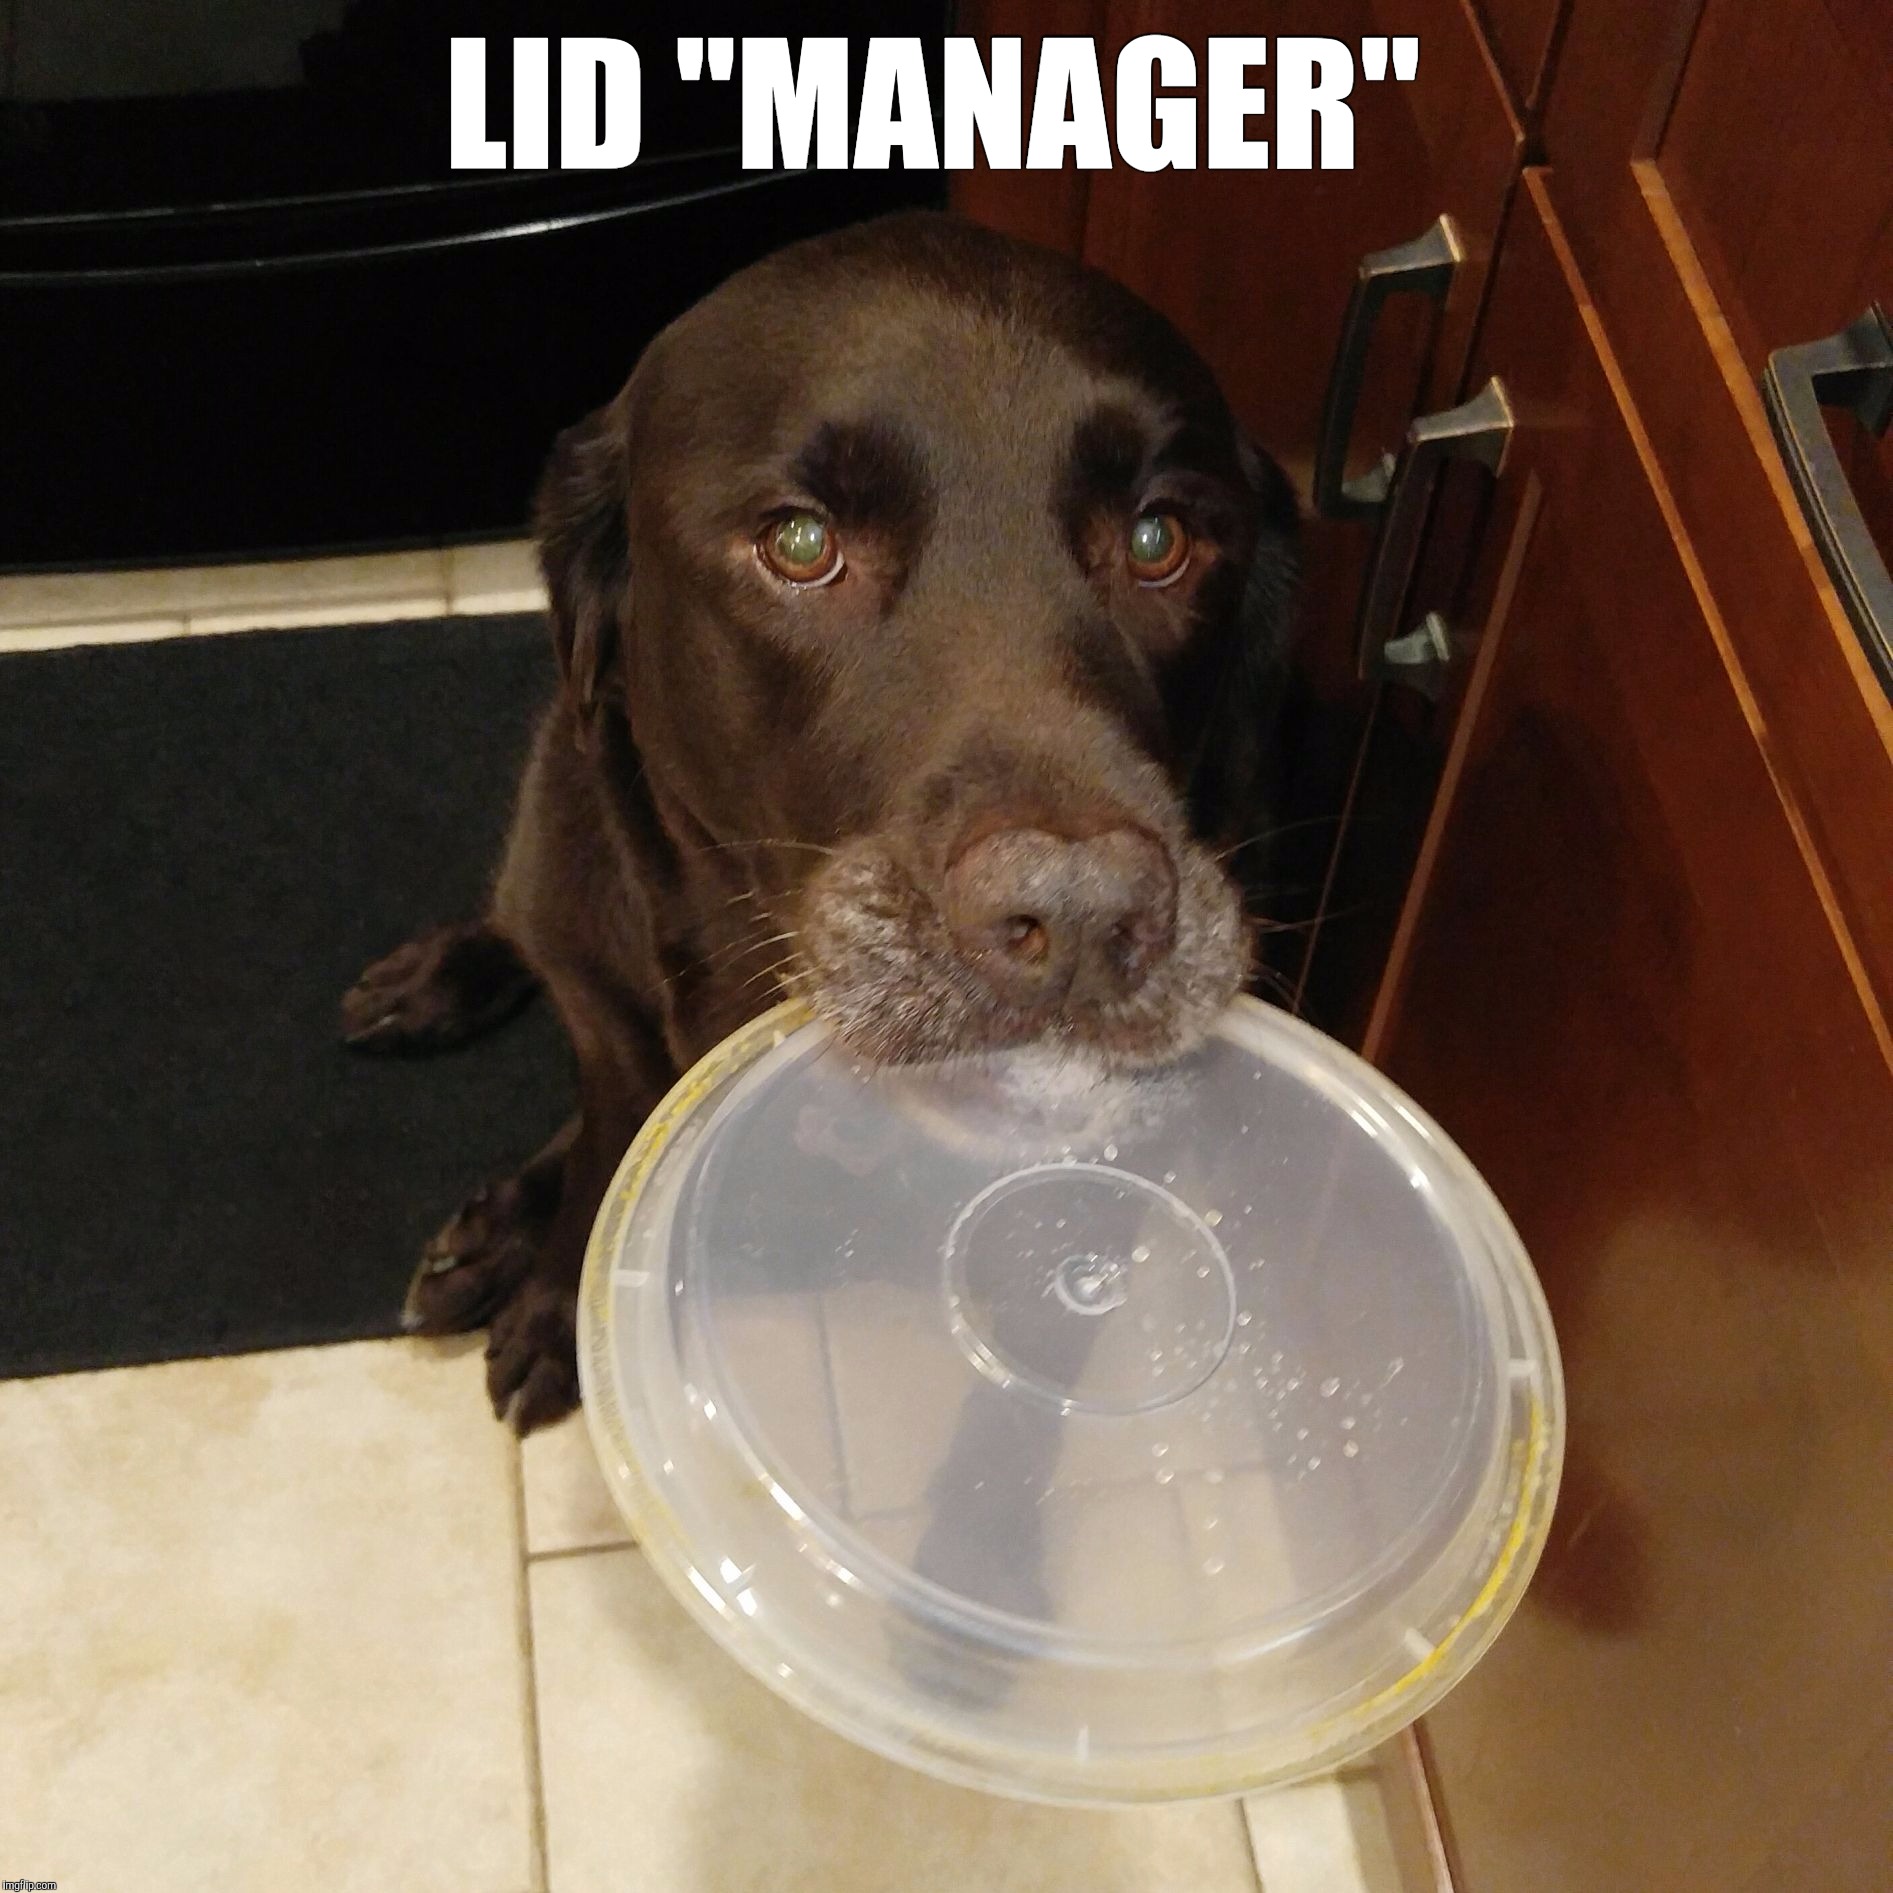 Lid Manager | LID "MANAGER" | image tagged in chuckie the chocolate lab,manager,lids,funny,dog memes,labrador | made w/ Imgflip meme maker